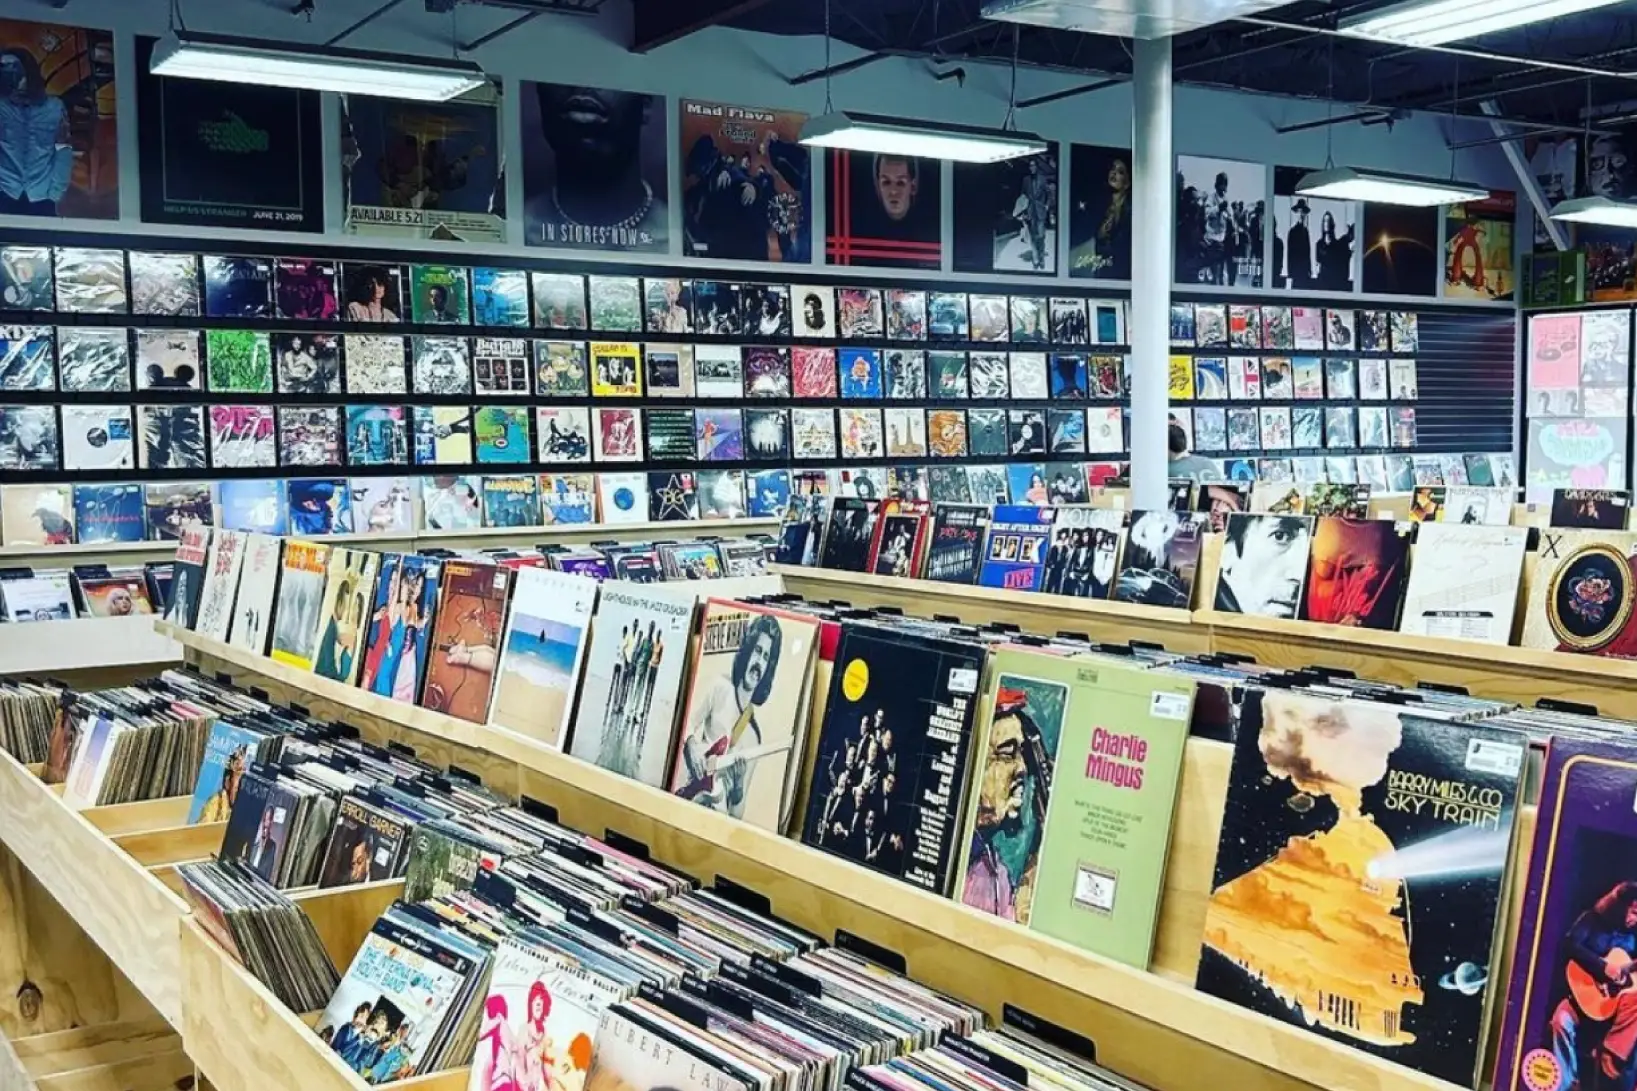 Many records organized on shelves and on the wall in a record store.